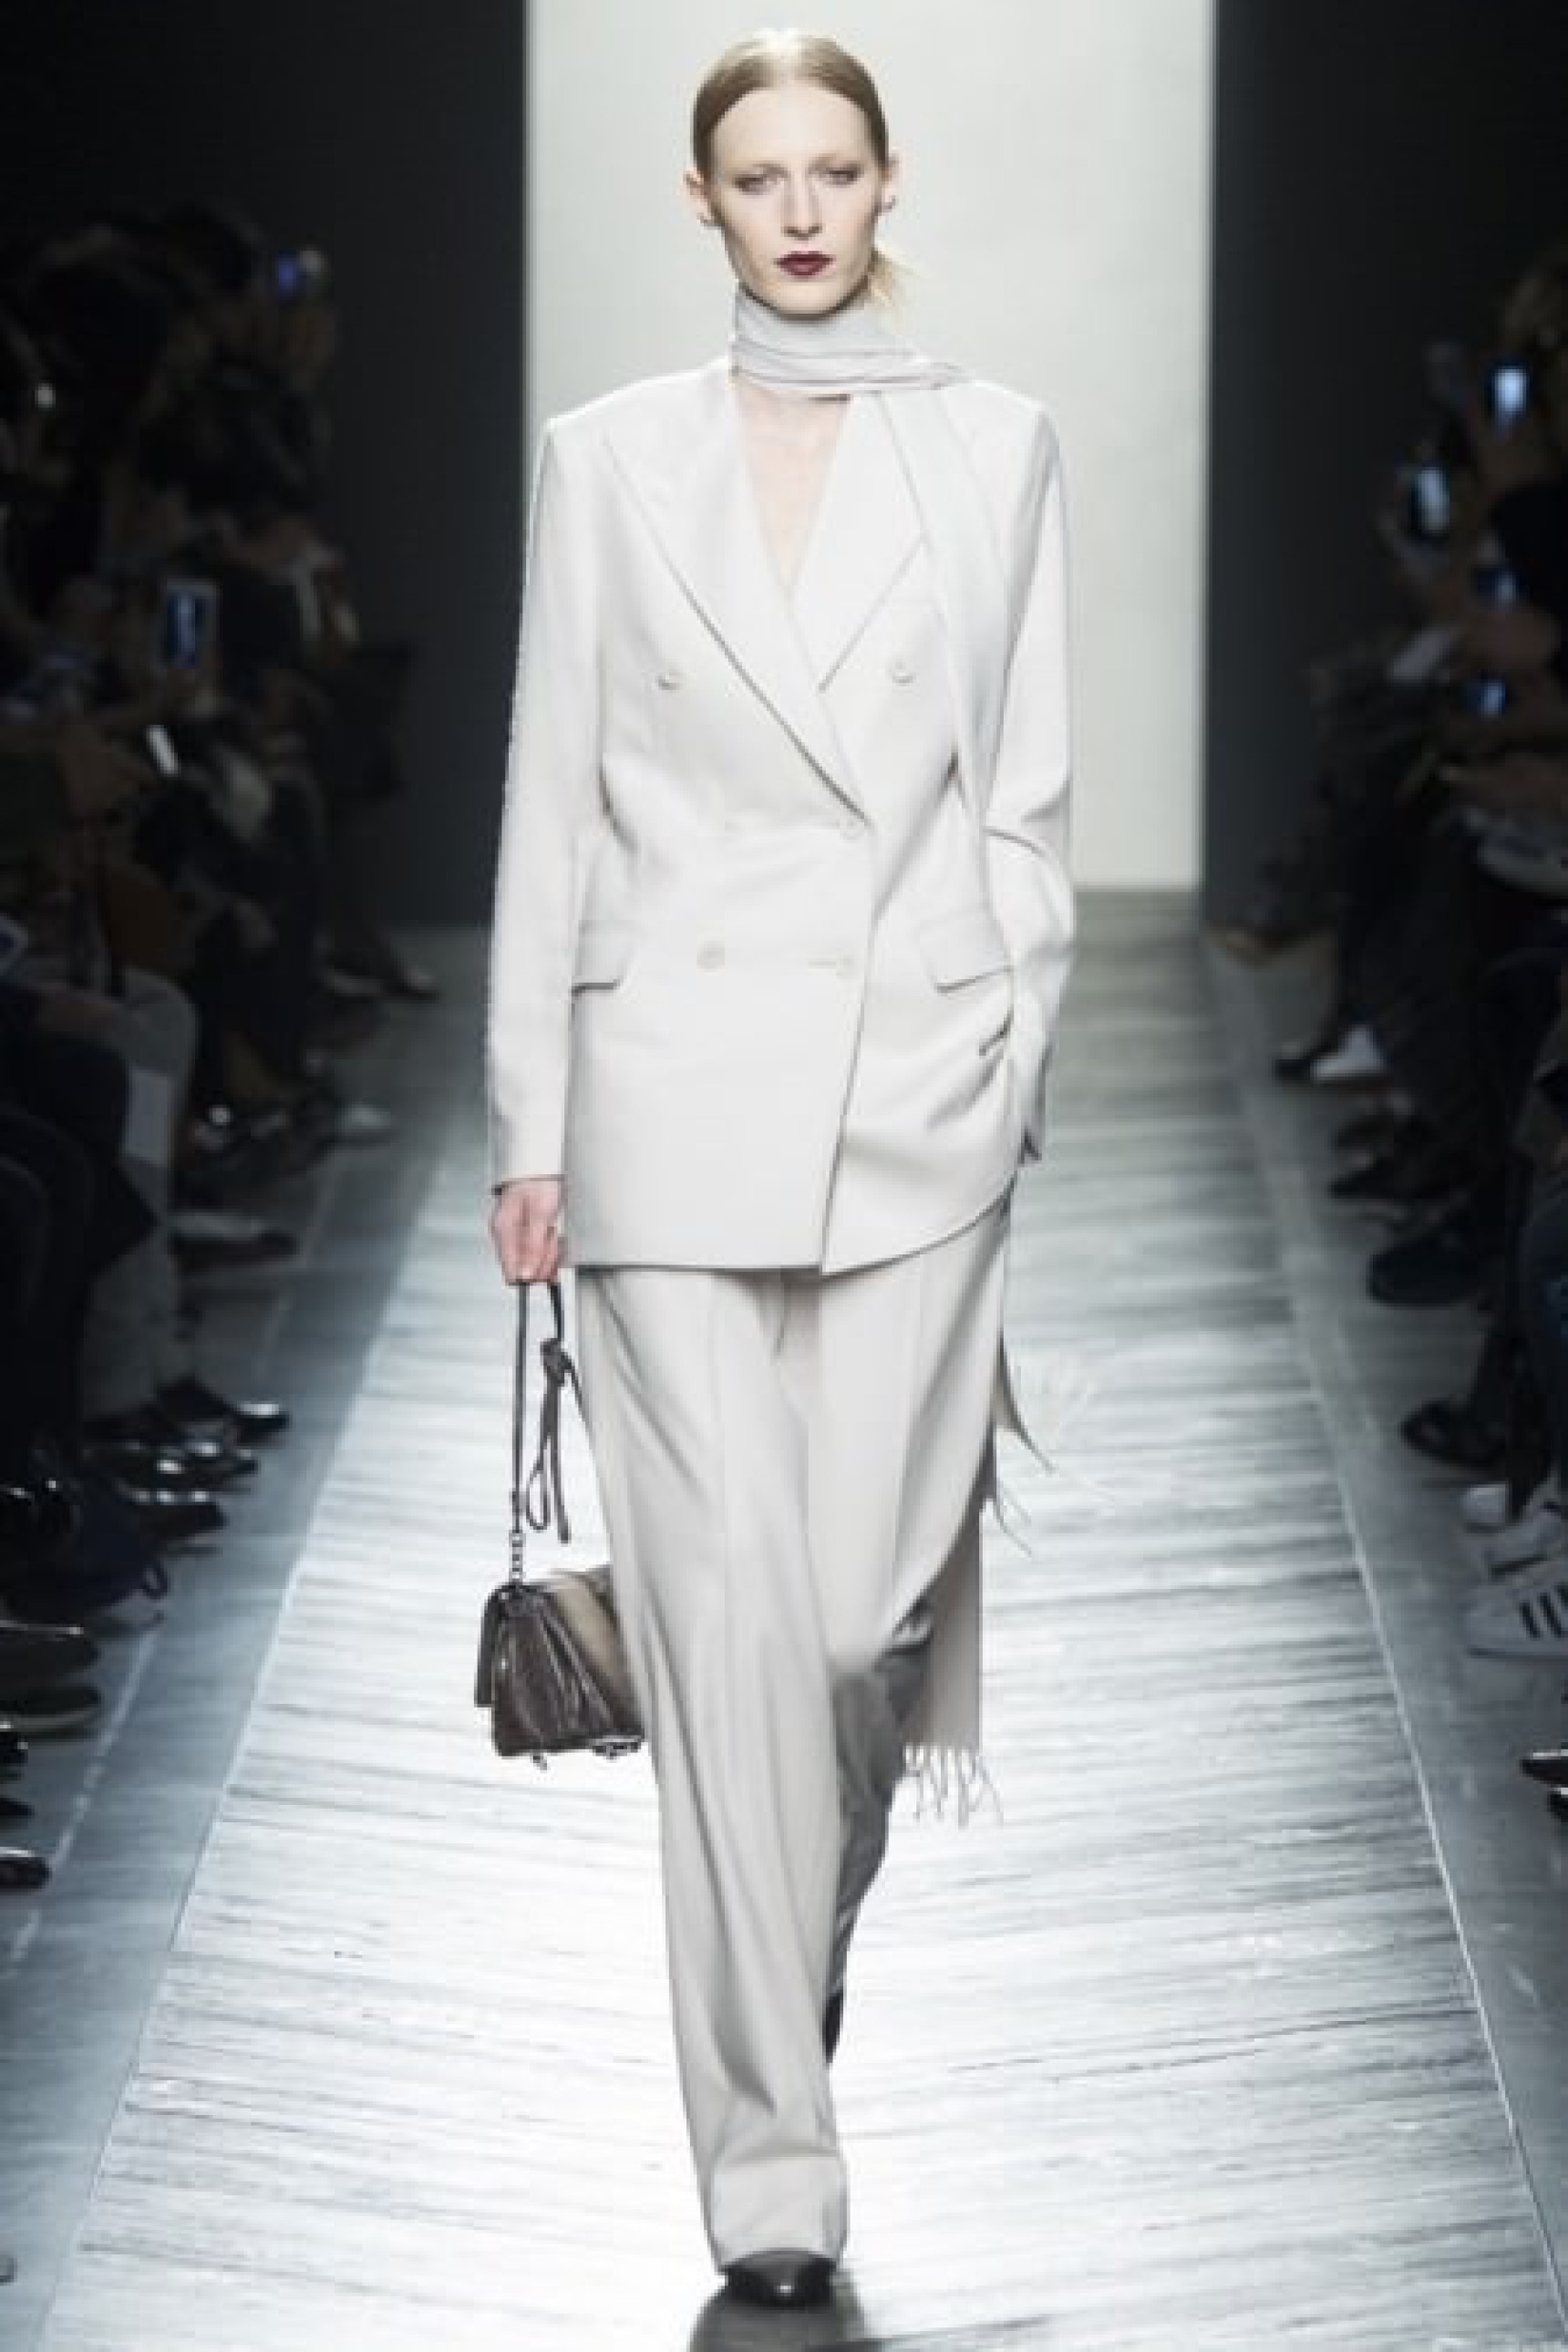 Model in white suit walking down the runway at a fashion show